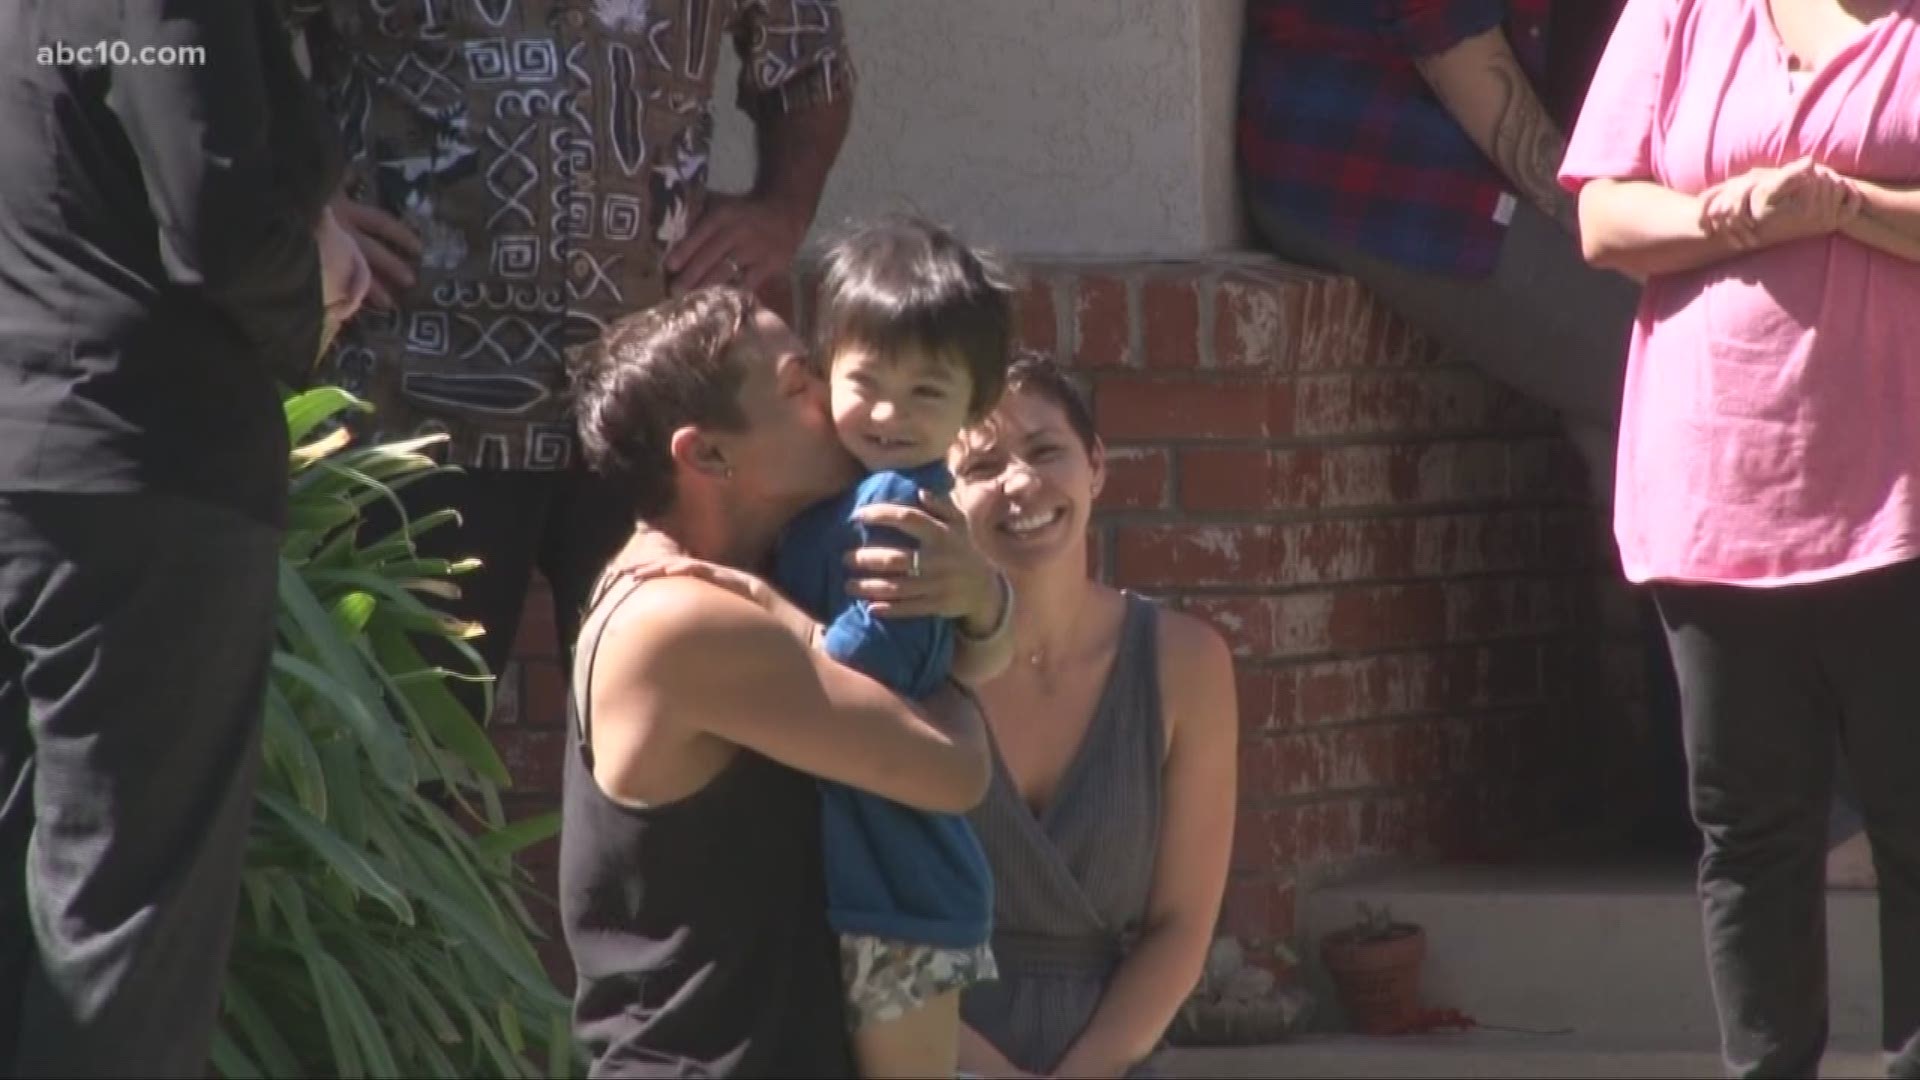 Jayce Cosso, the Modesto boy who was abducted by his father, has been reunited with his family.